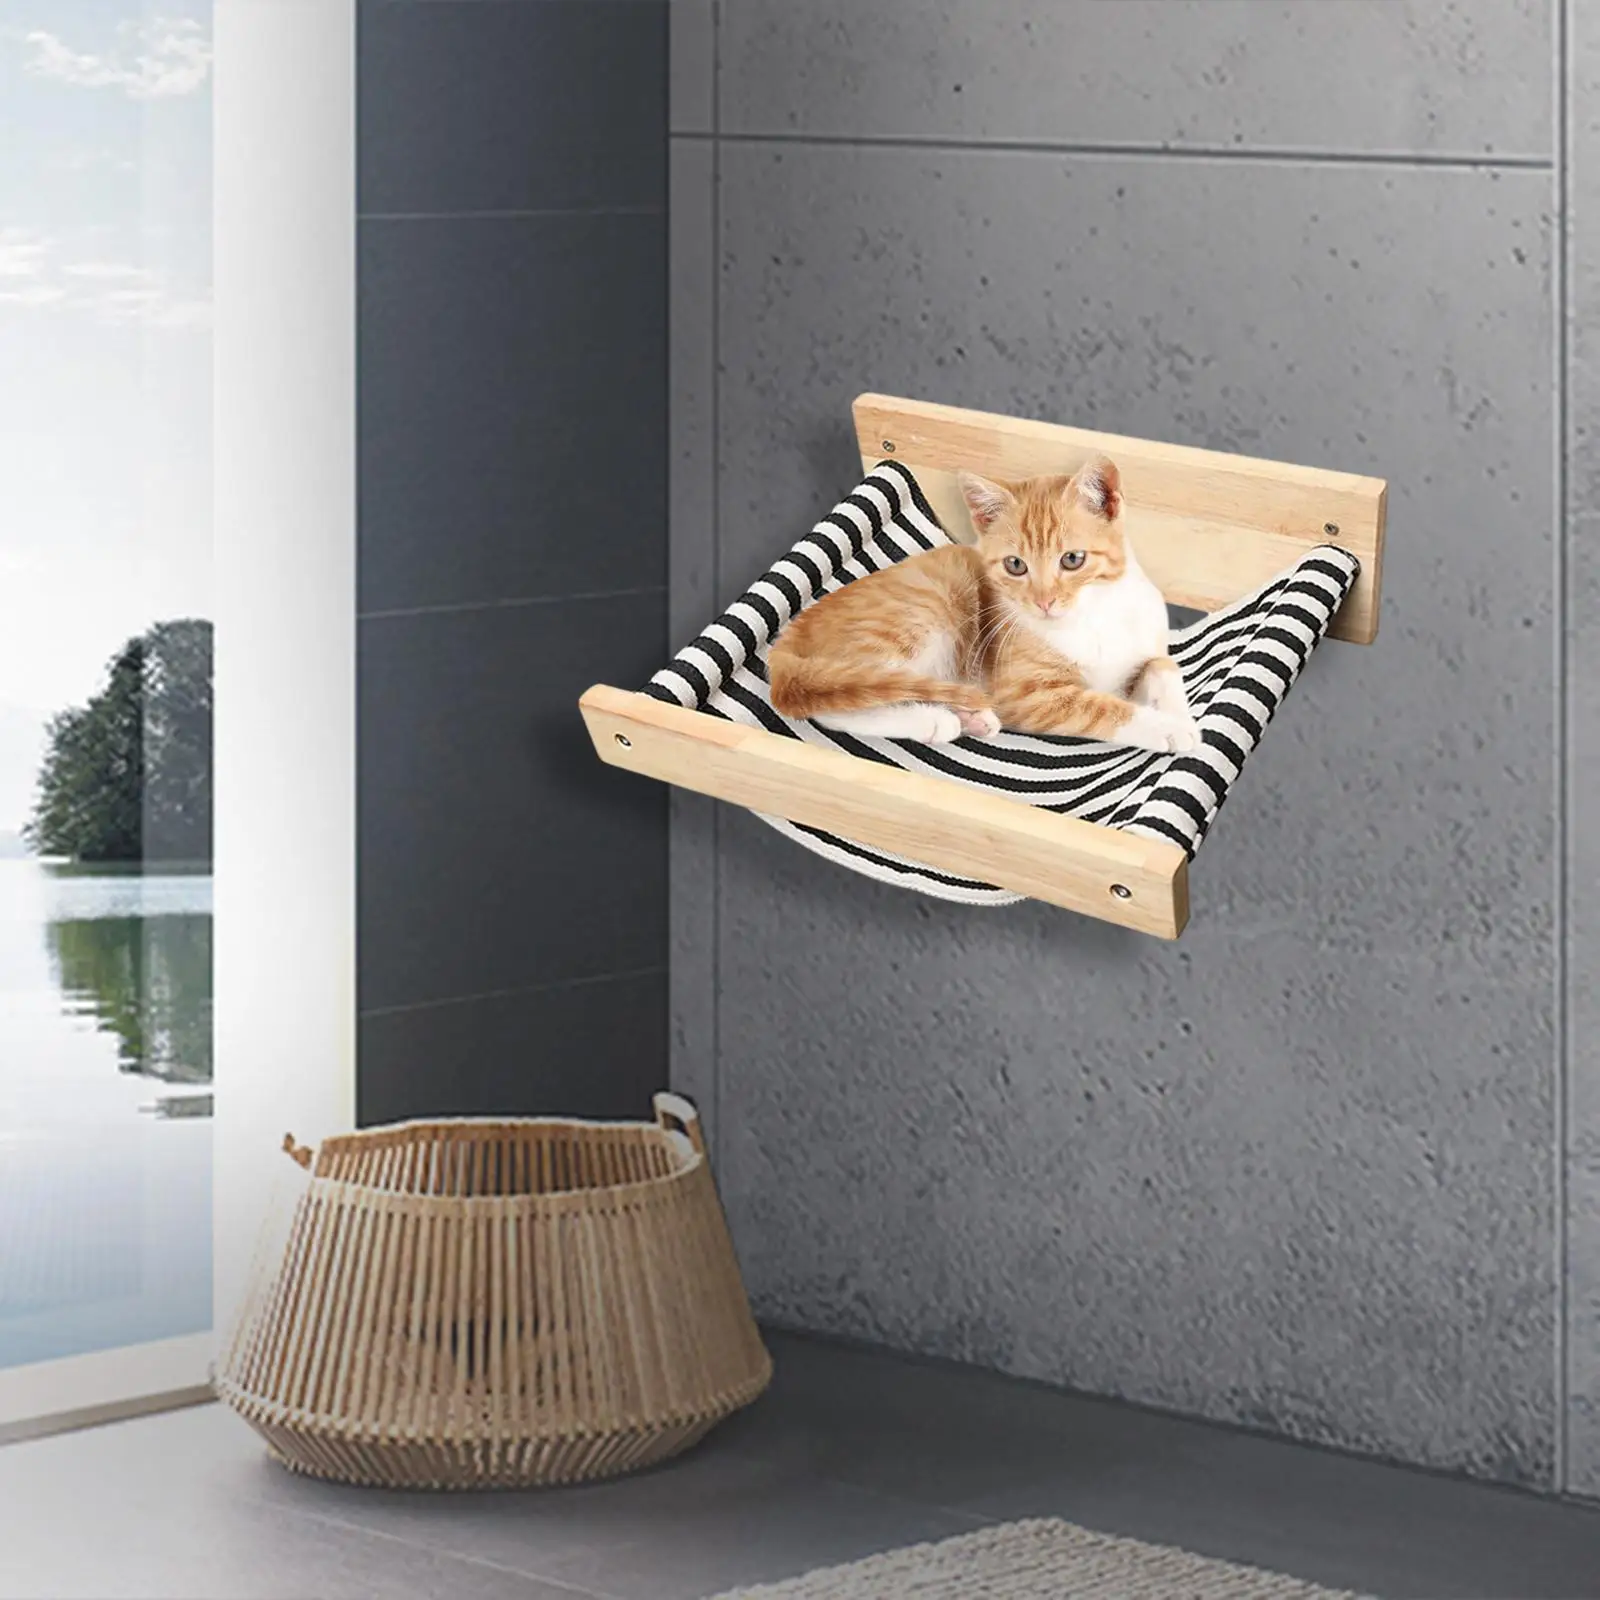 Cat Hammock Wall Mounted Lounging Comfortable Cat Perches Kitty Beds Perches